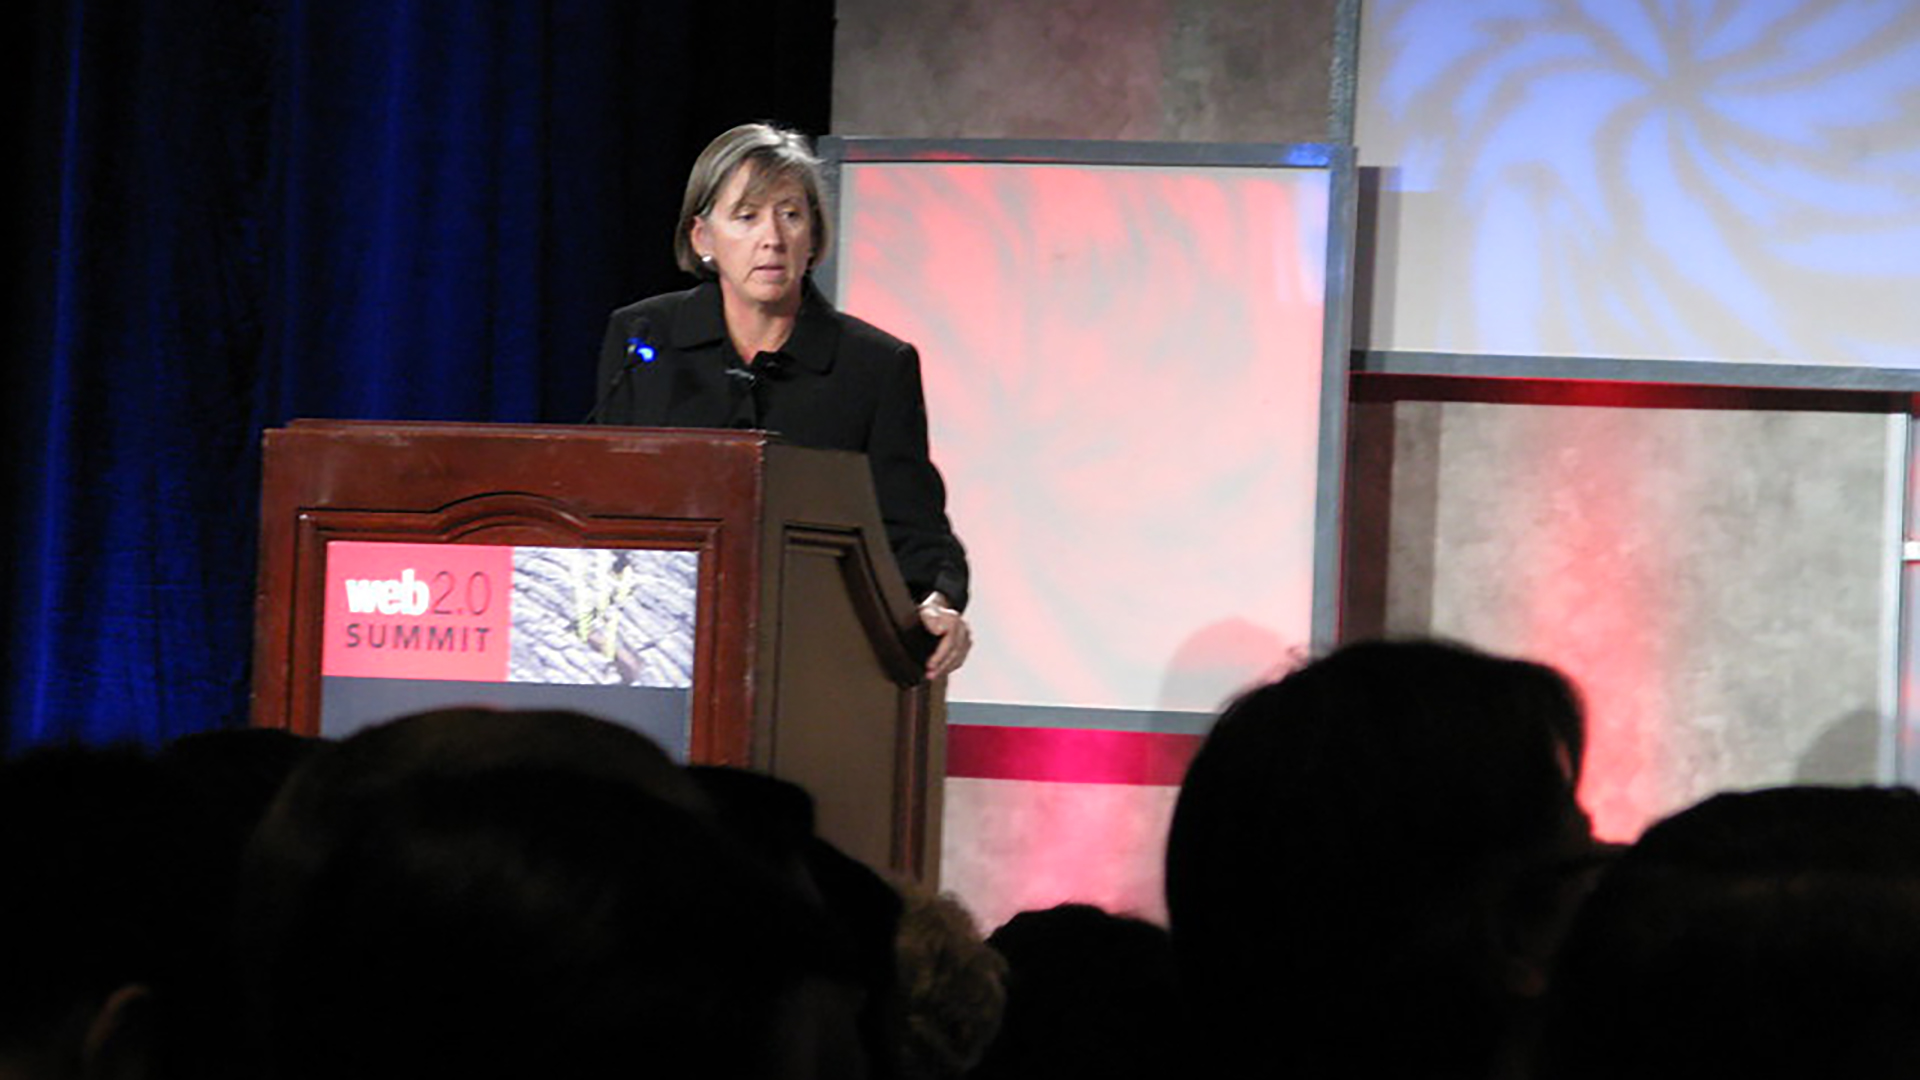 Mary Meeker at the podium